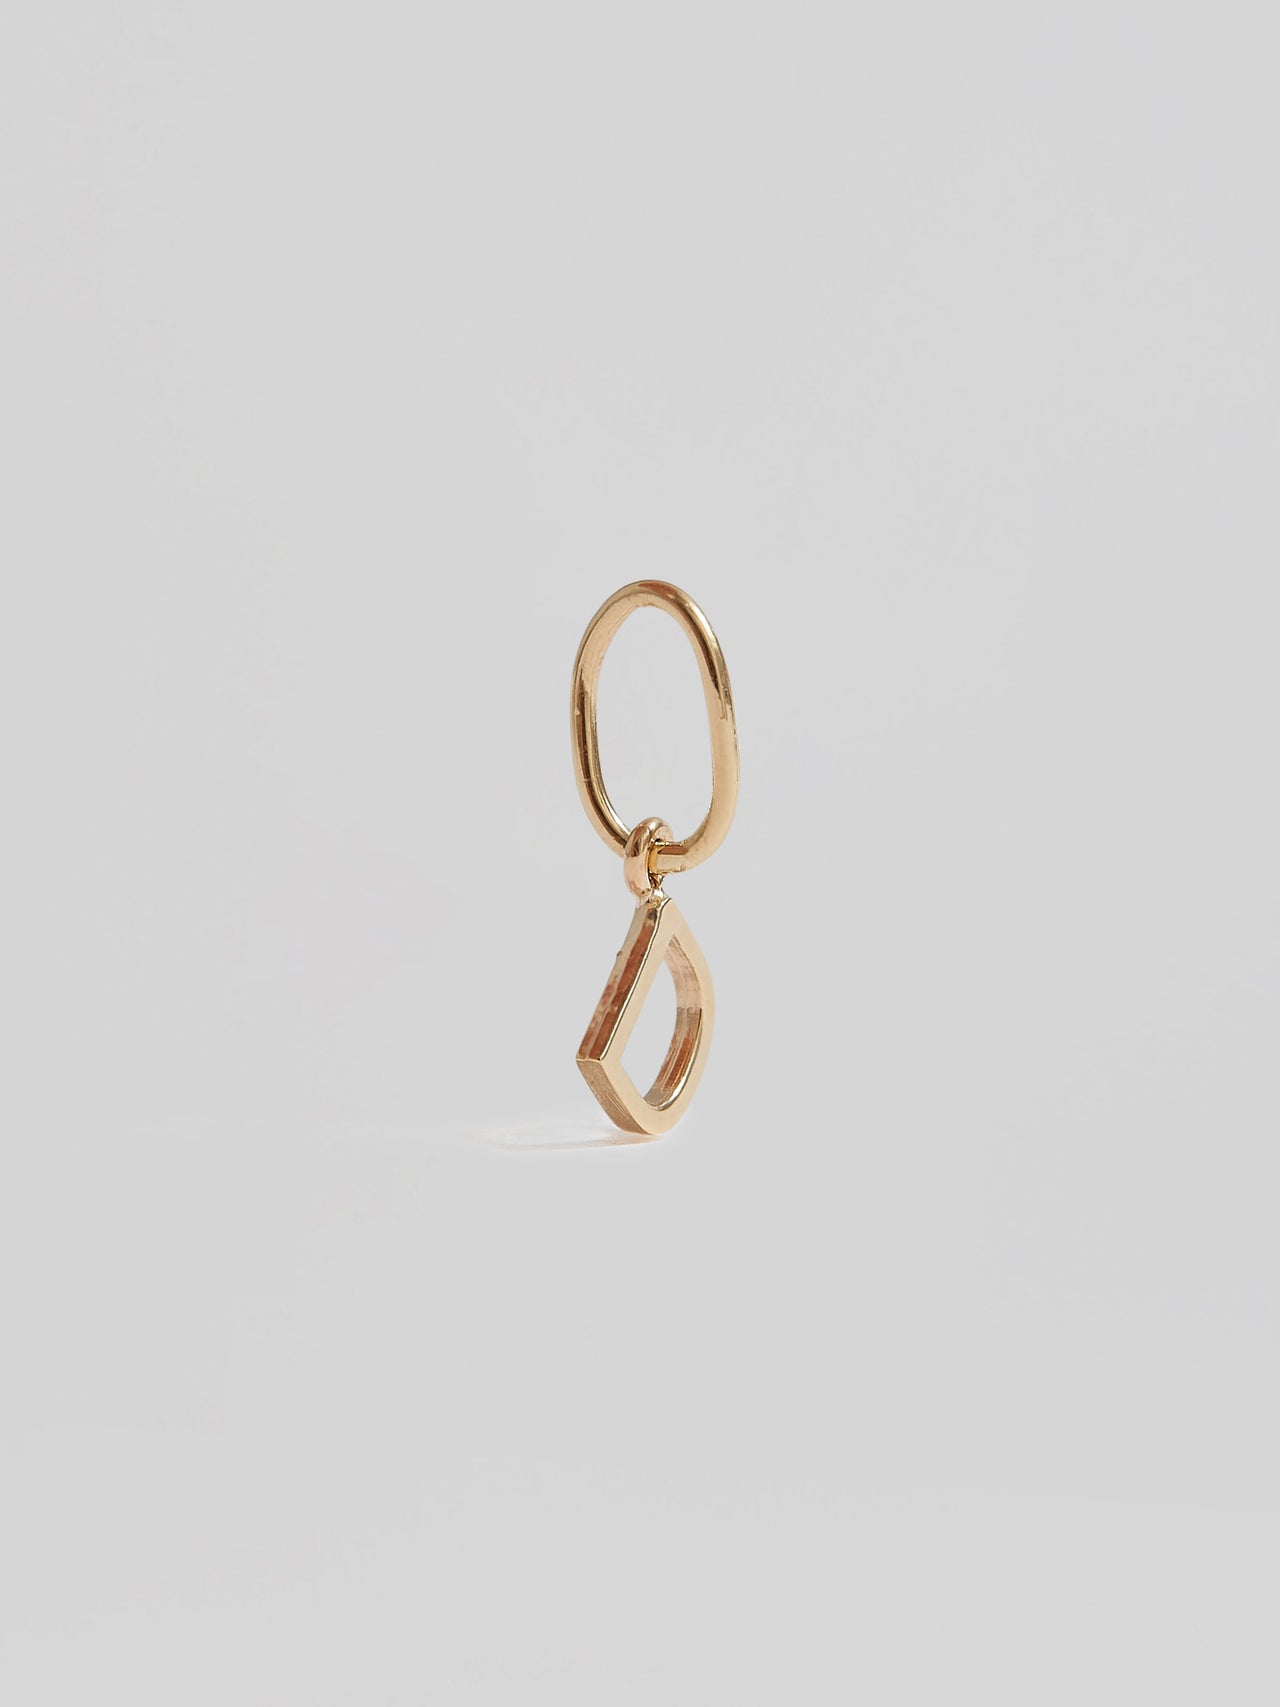 Close up of 14KT Yellow Gold Letter "D" Pendant